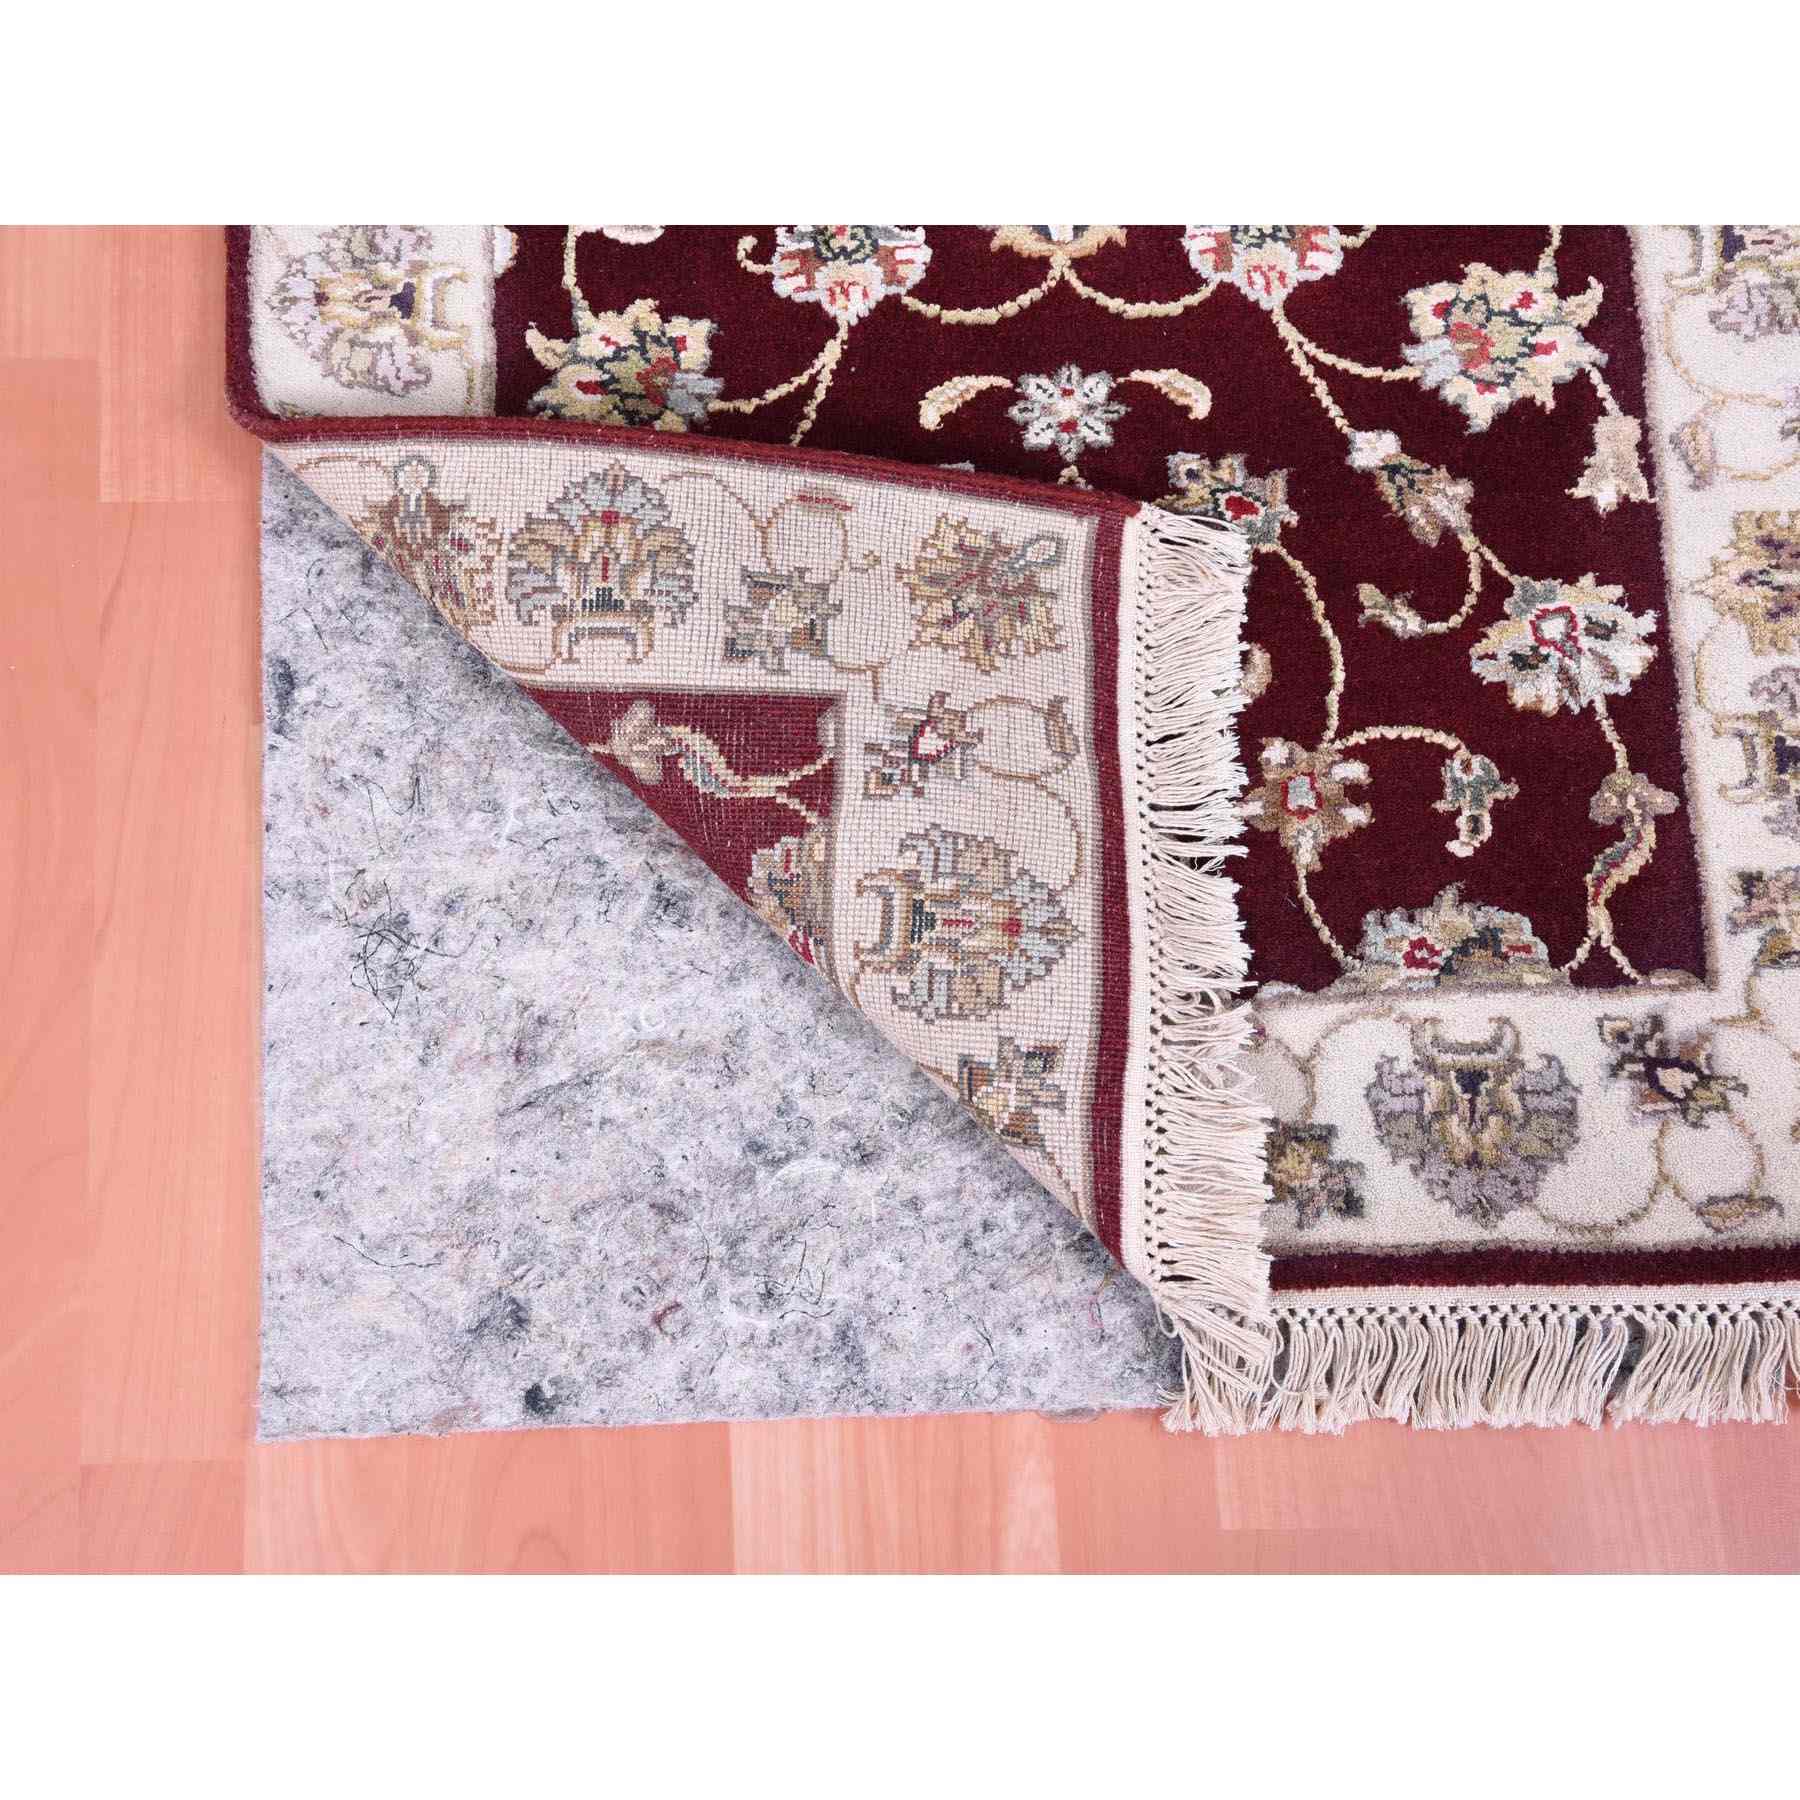 Rajasthan-Hand-Knotted-Rug-375280